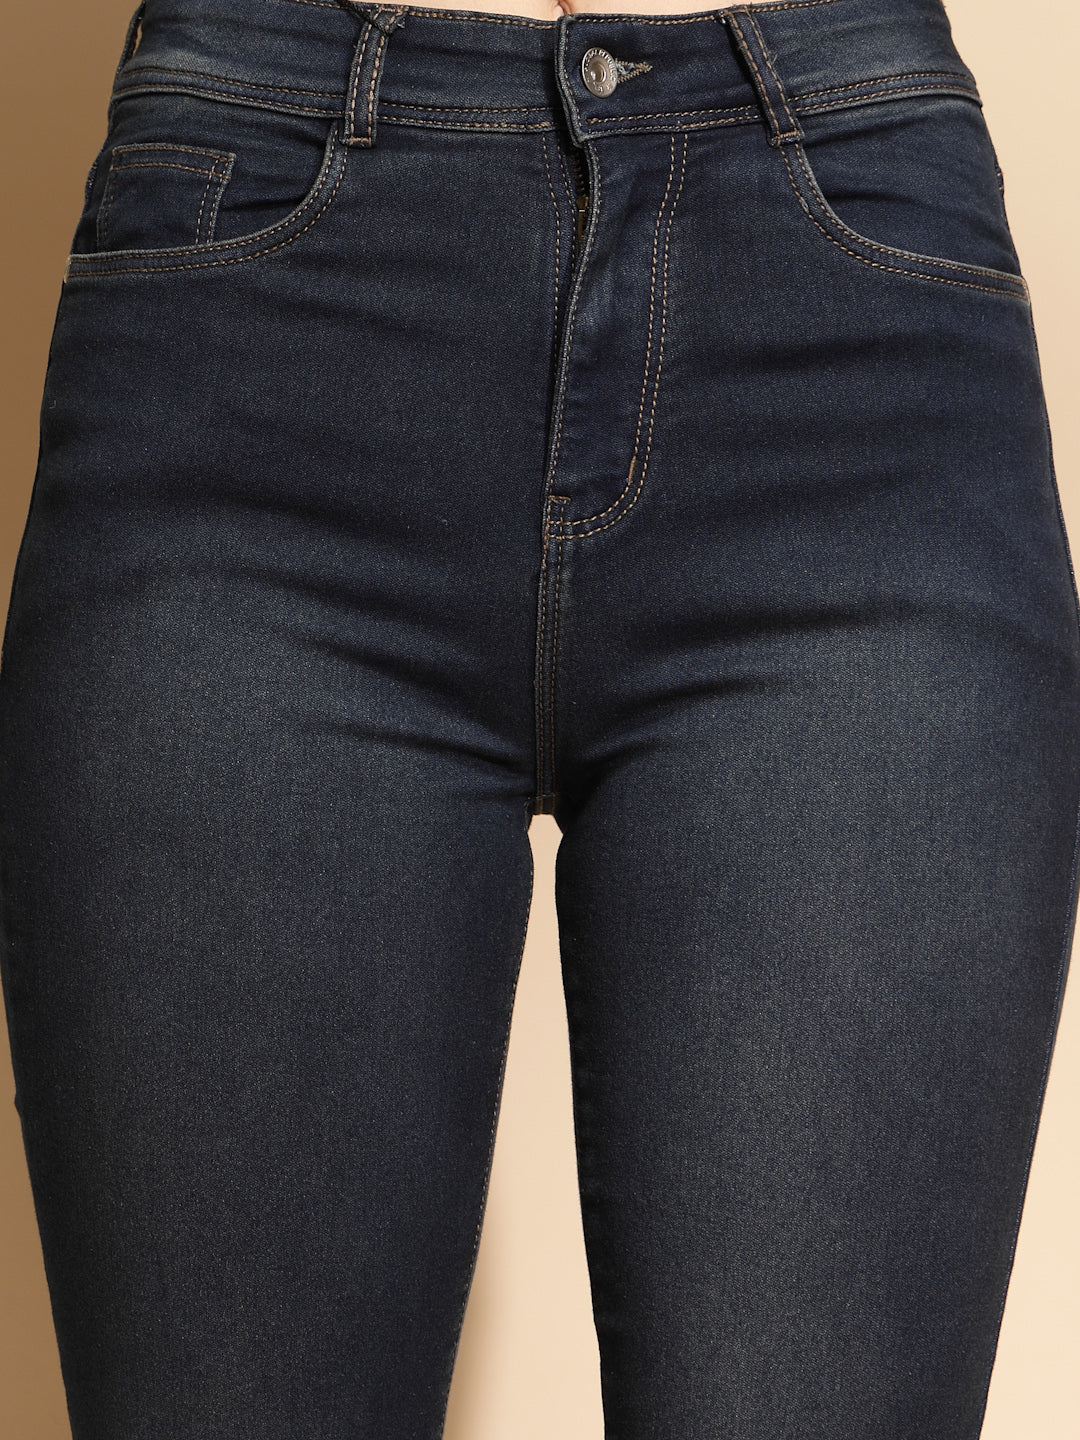 Women Tint Blue Solid Cotton Blend Mid Rise Skinny fit Jeans